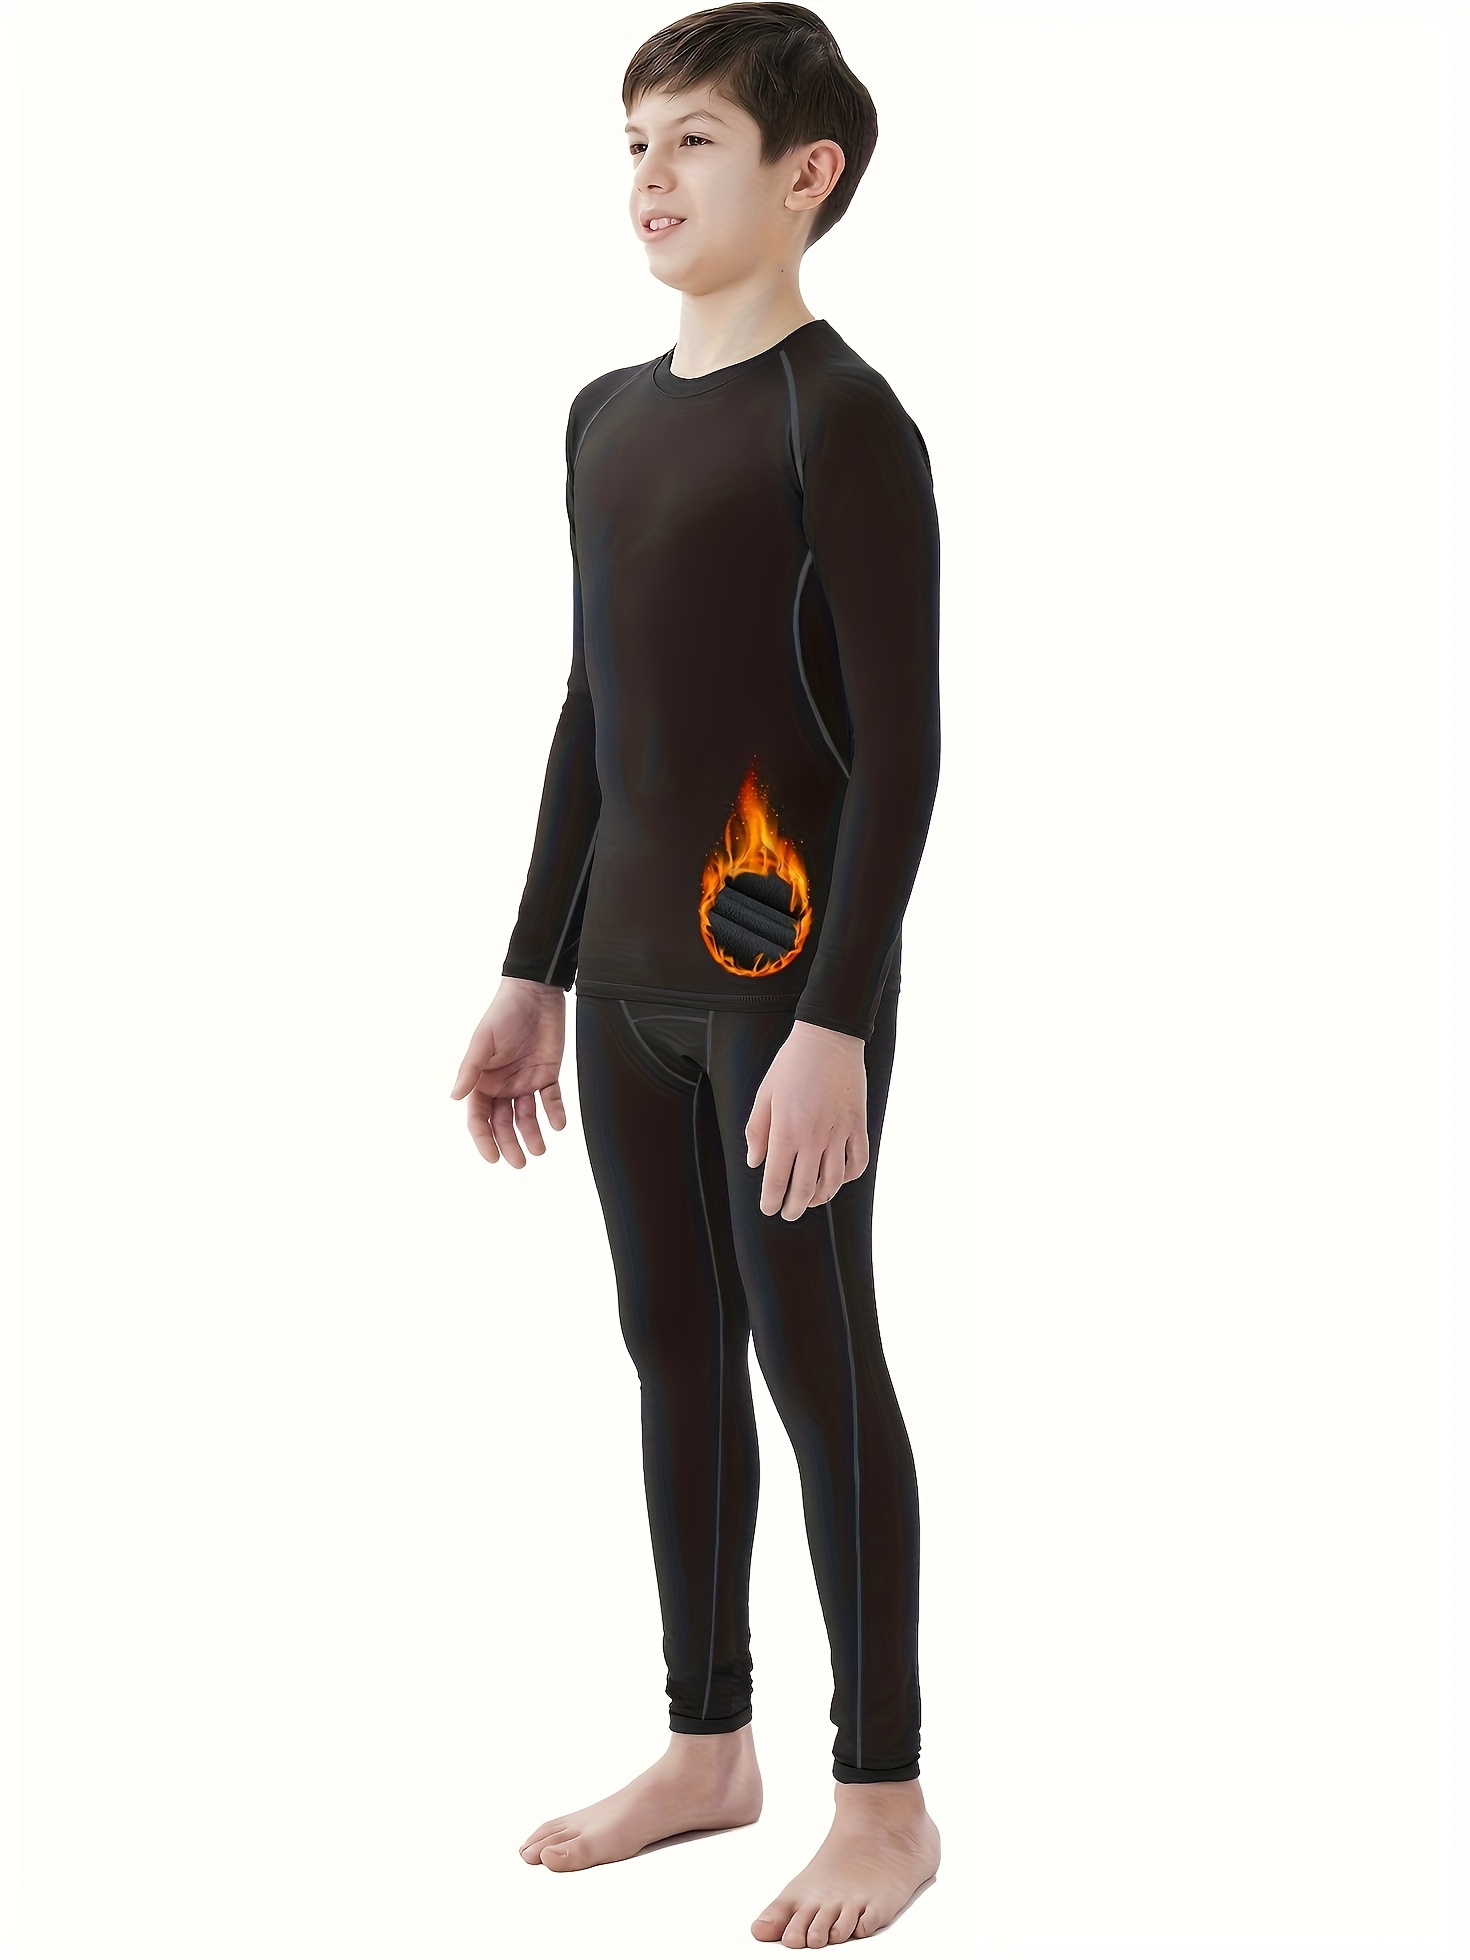  Boys Thermal Compression Leggings Pants Youth Fleece